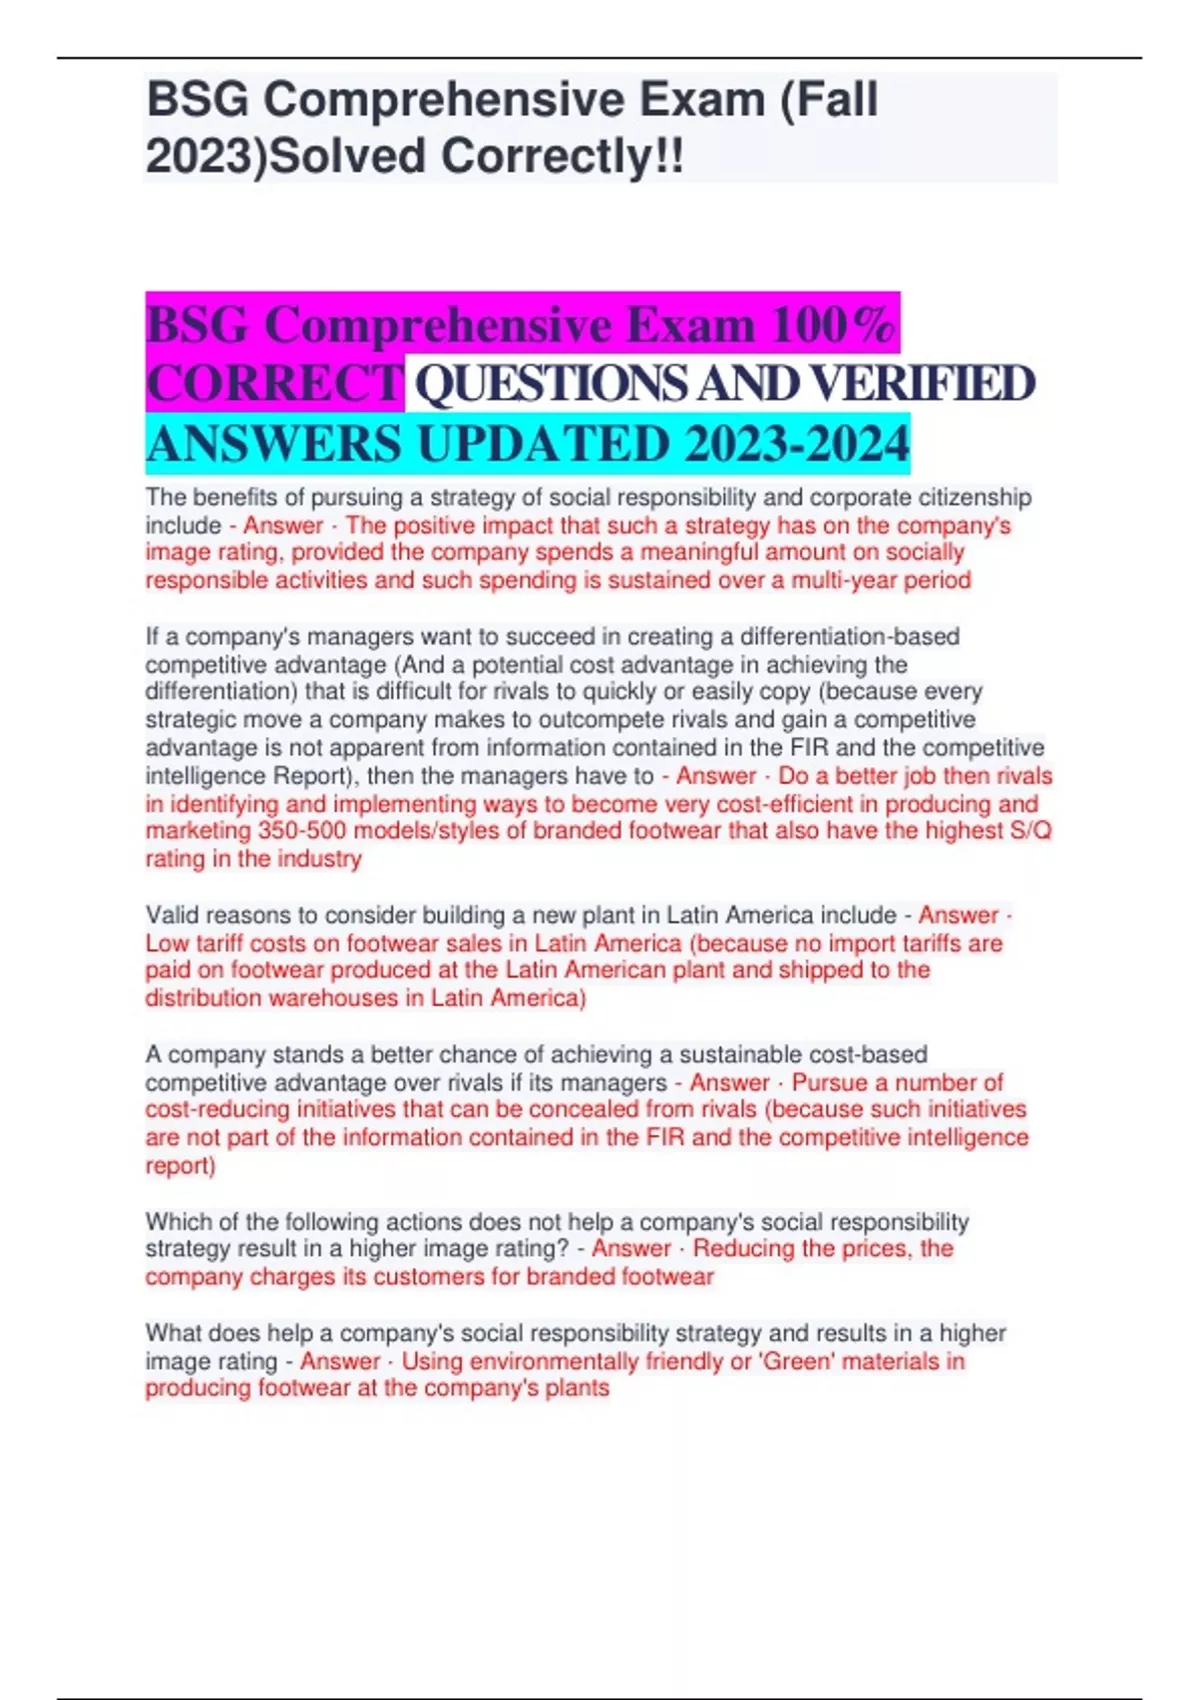 BSG Comprehensive Exam 100 CORRECT QUESTIONS AND VERIFIED ANSWERS